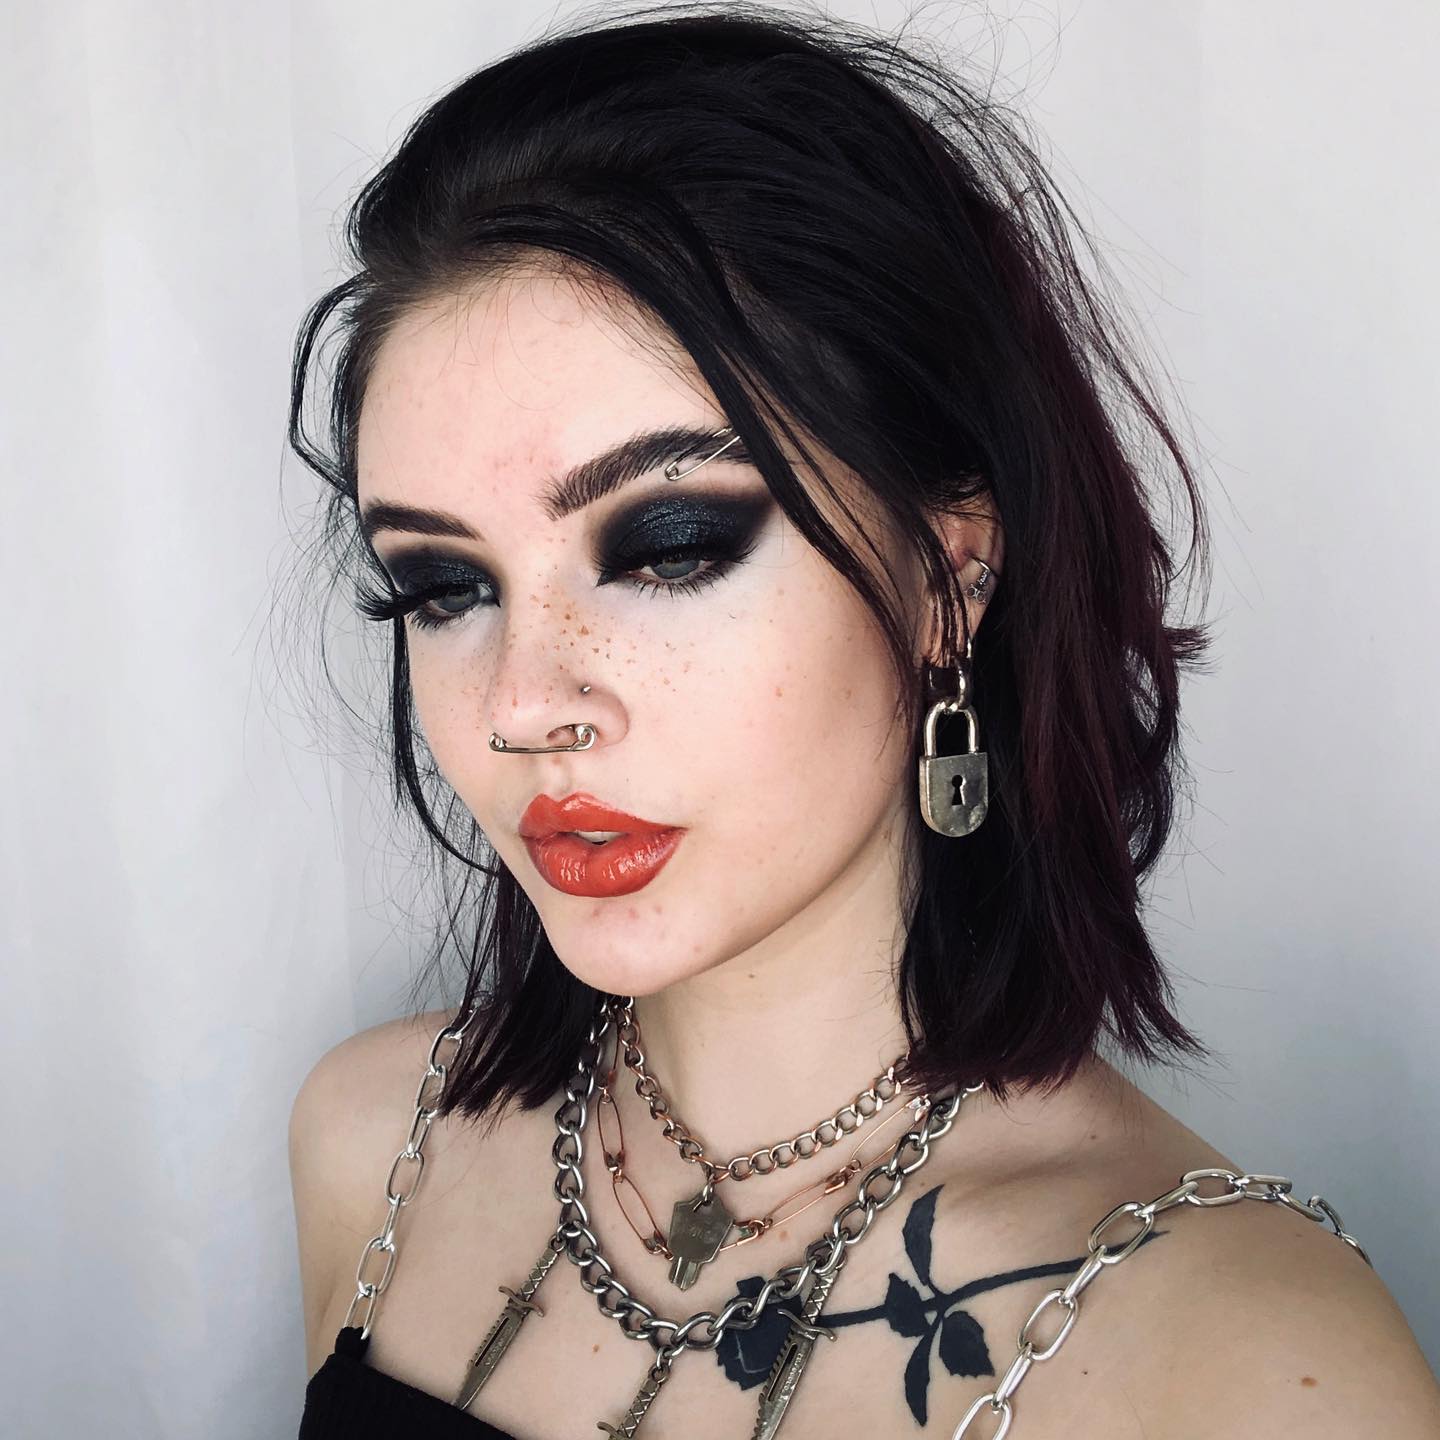 Top Emo Makeup Ideas For When You Want To Experiment Hairstyle